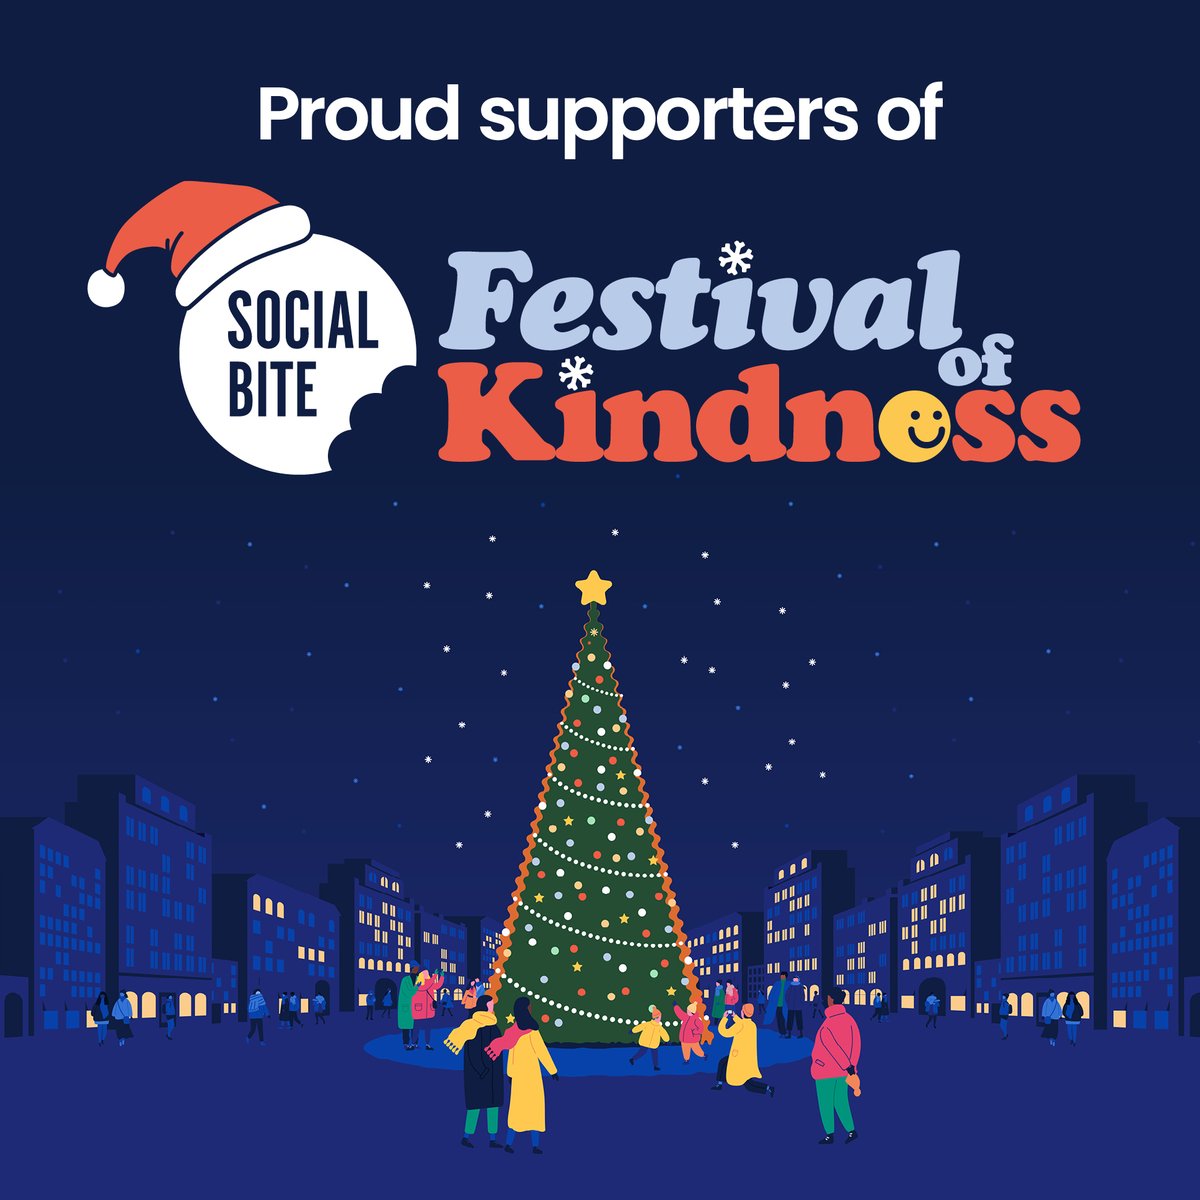 Spotlighting homelessness, @SocialBite_ is transforming lives with homes, jobs and support. We’re supporting their work through our 2023 Christmas appeal - #MakingADifferece for those who need it most. Find out more: hubs.la/Q02cN05k0 #BusinesswithPurpose